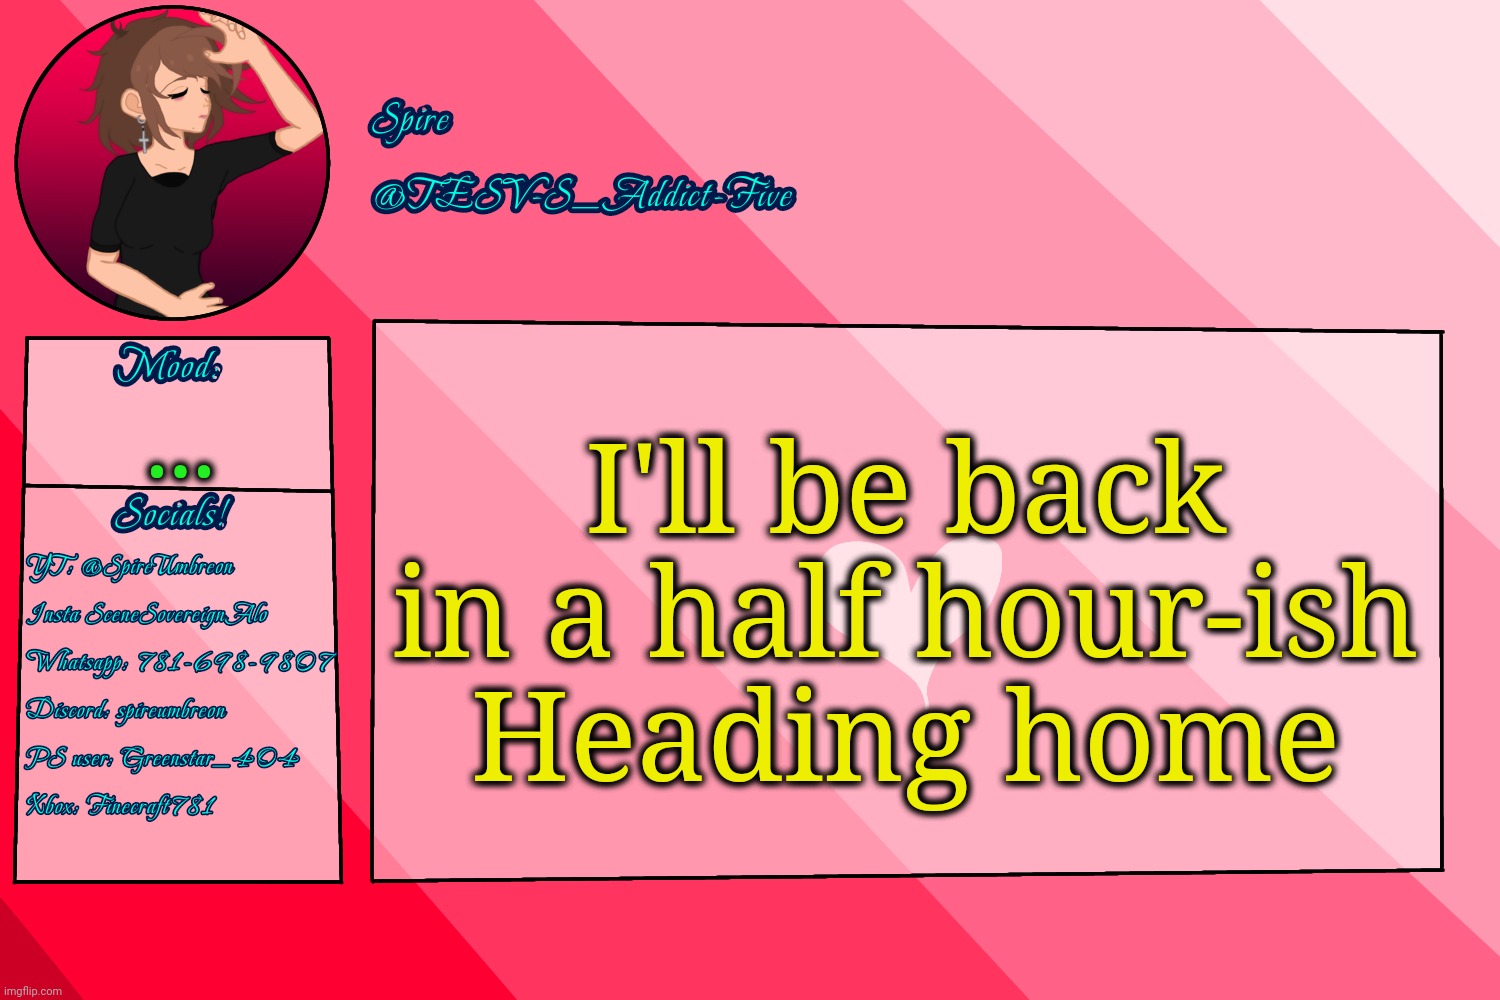 . | I'll be back in a half hour-ish
Heading home; ... | image tagged in tesv-s_addict-five announcement template | made w/ Imgflip meme maker